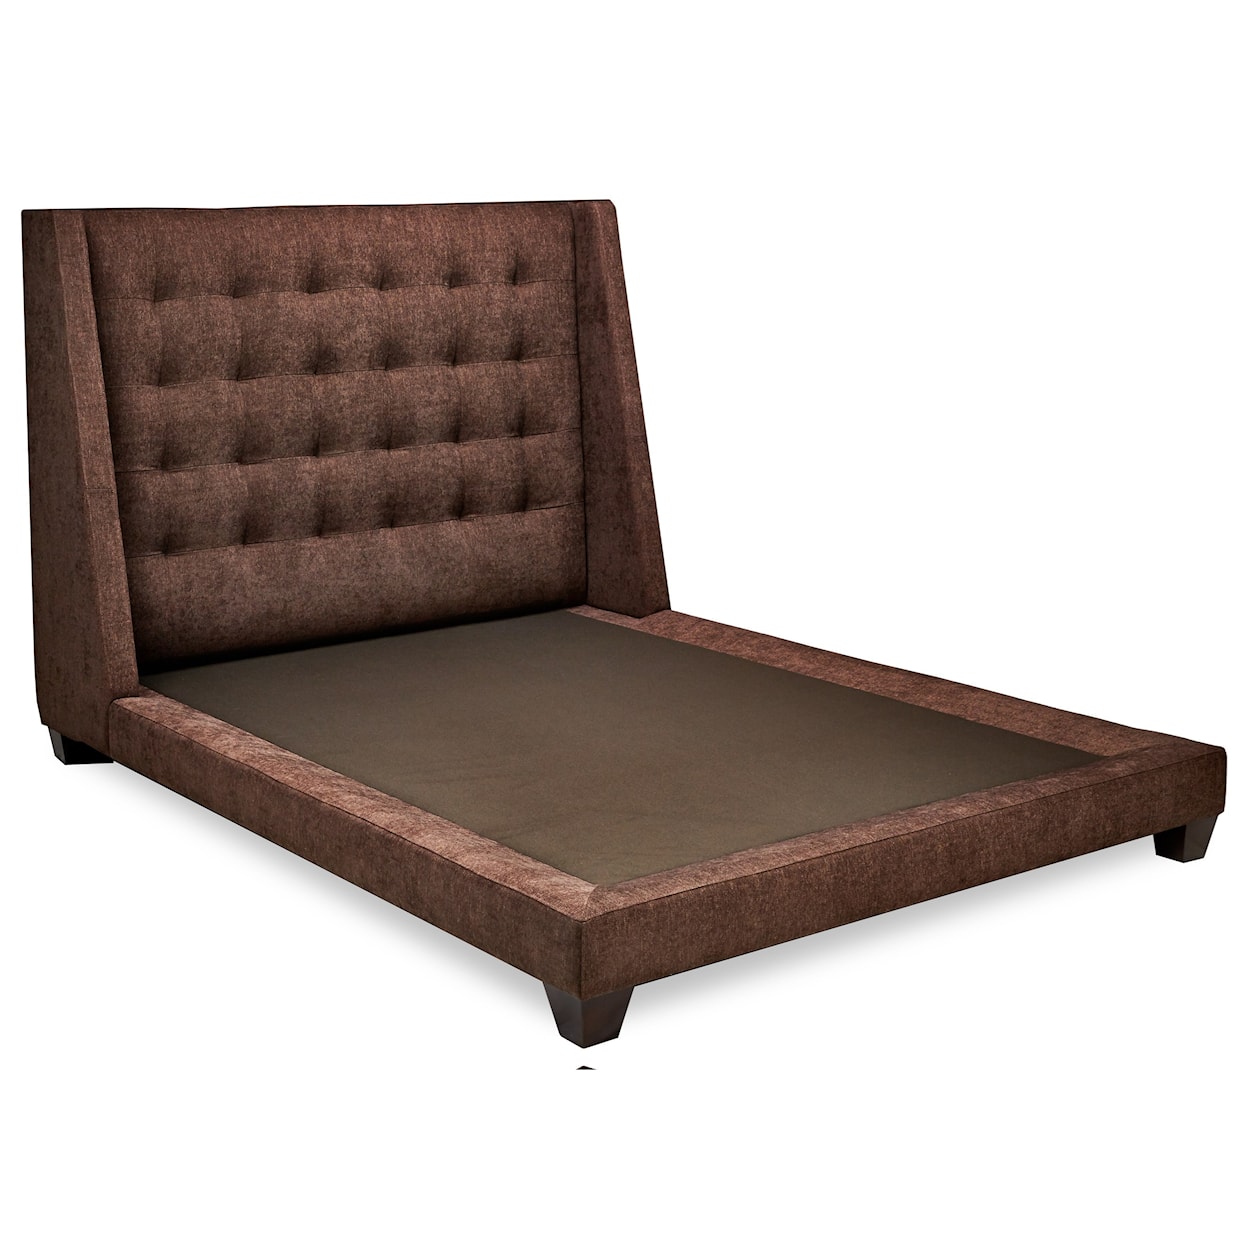 American Leather Shaw Full Upholstered Shelter Bed